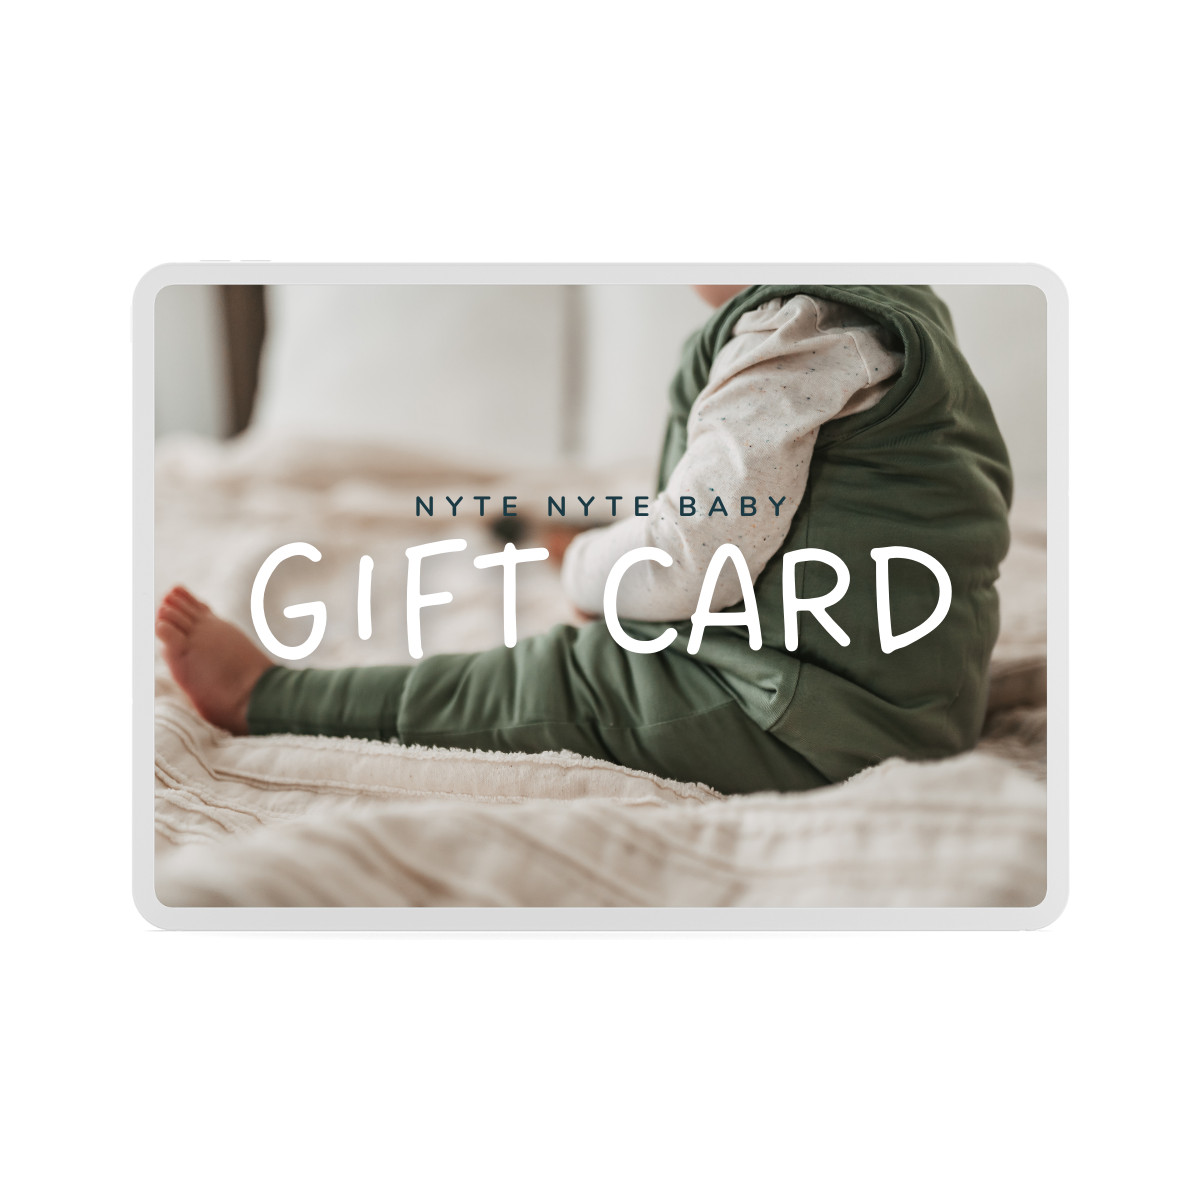 Nyte Nyte Baby Gift Card